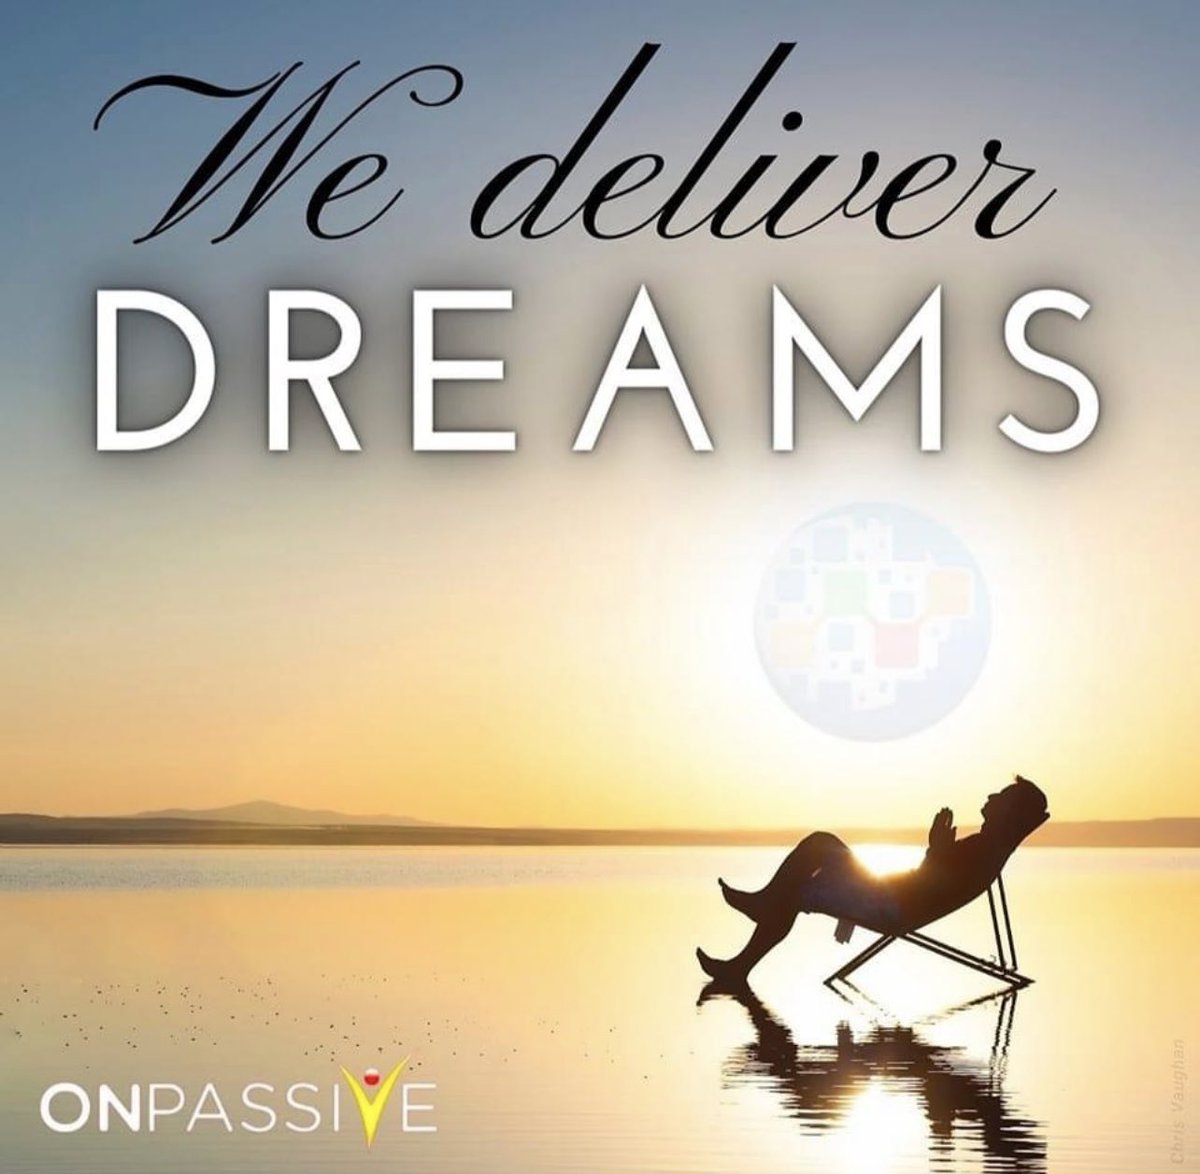 Whatever Your Dreams are, ONPASSIVE will Help You Accomplish them!

Create a Free Acc Here: o-trim.co/paulsamoes

#ONPASSIVE #TheFutureOfInternet #ResidualIncome #allautomated #AIproducts #AItools #onlinebusiness #ArtificialIntelligence